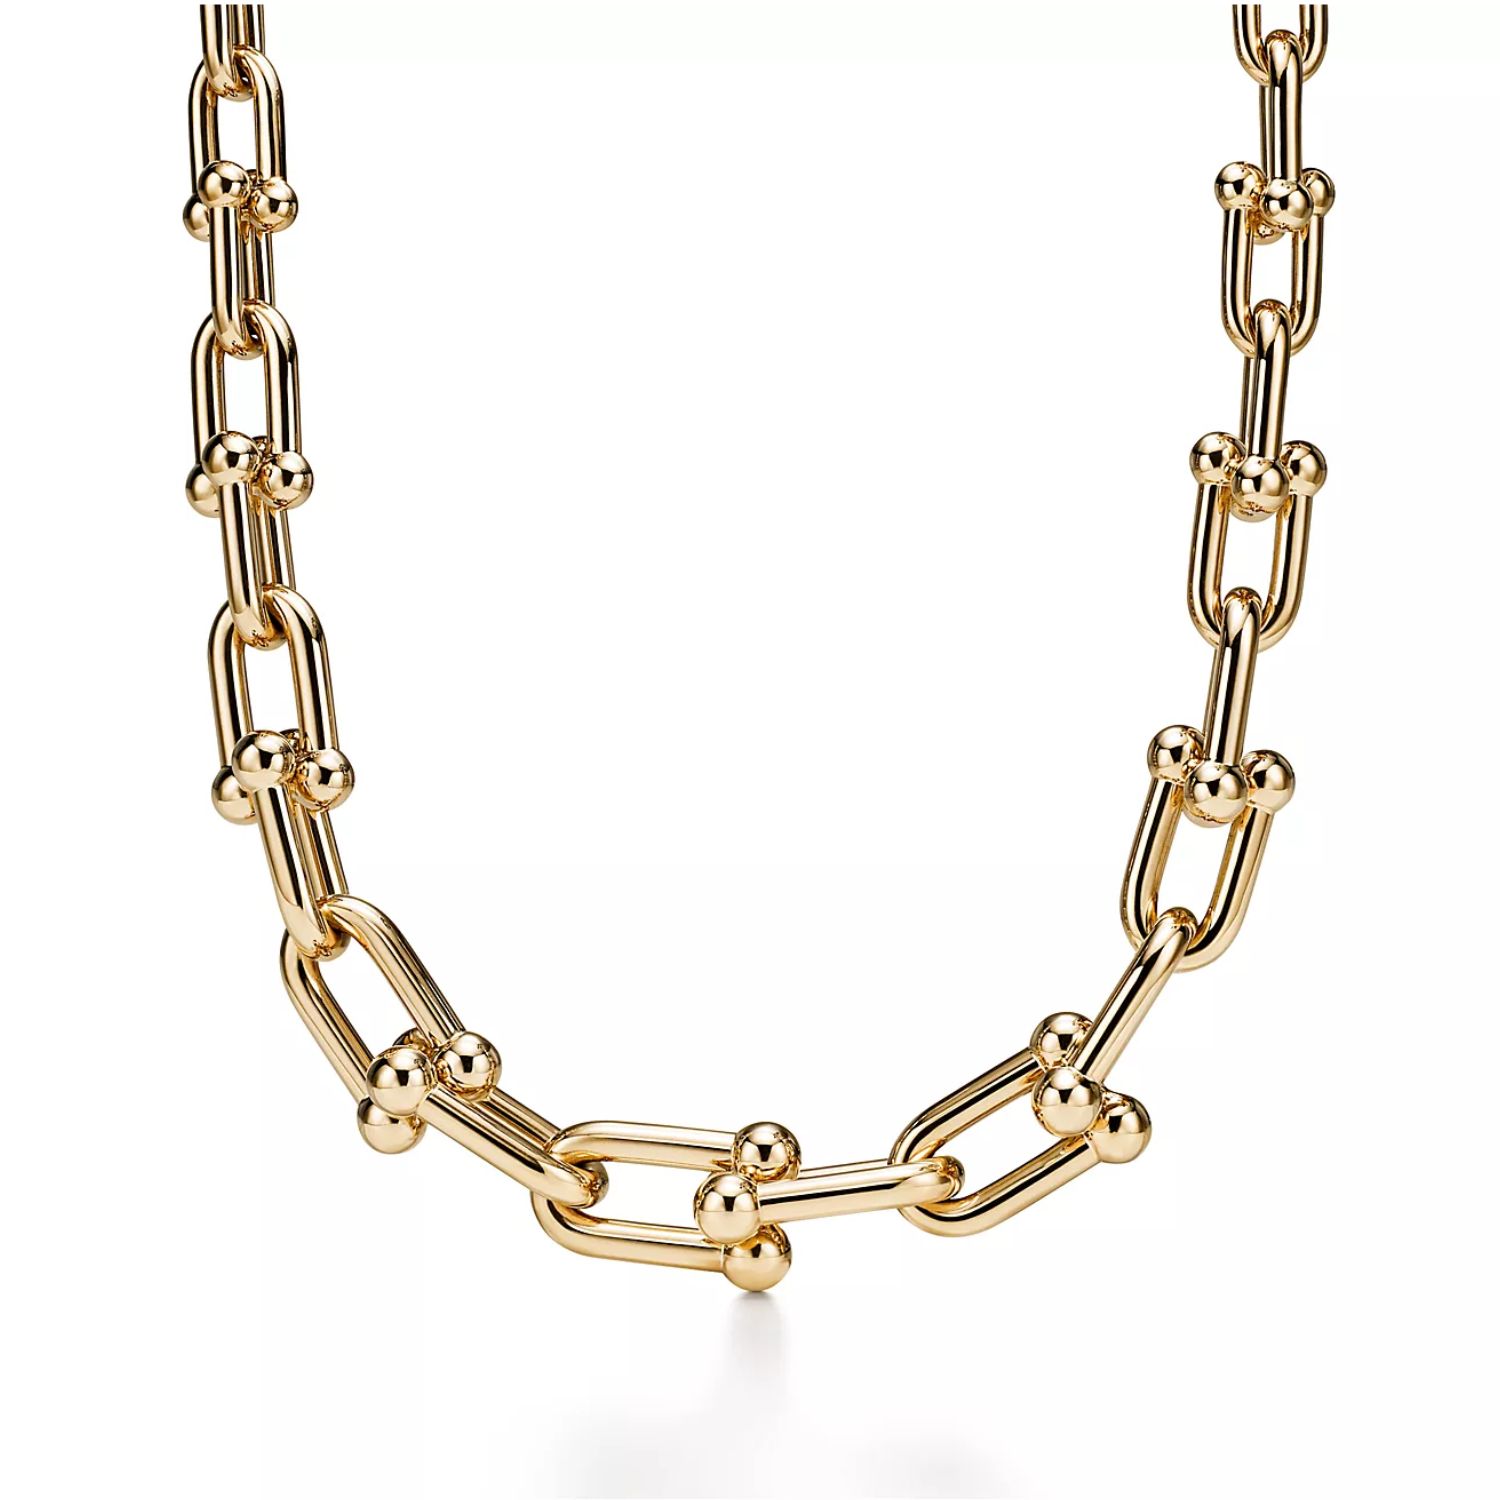 The Tiffany chain is the perfect addition to any jewelry collection. The chain is made from high-quality materials, which ensures its durability and style. Made of gold-plated brass, it has a luxurious shine that catches the light perfectly. It measures 55 cm in length, making it the perfect length to wear alone or stack with other chains. The clasp is a Tiffany link, which is easy to use and makes the chain look seamless. This chain is characterized by elegance and sophistication. It can be worn with any outfit, whether you want to dress up for a special occasion or add a touch of glamour to your everyday look. Experience unparalleled beauty by ordering this stunning Tiffany chain from our e-shop. This necklace will be a great addition to your jewelry collection.